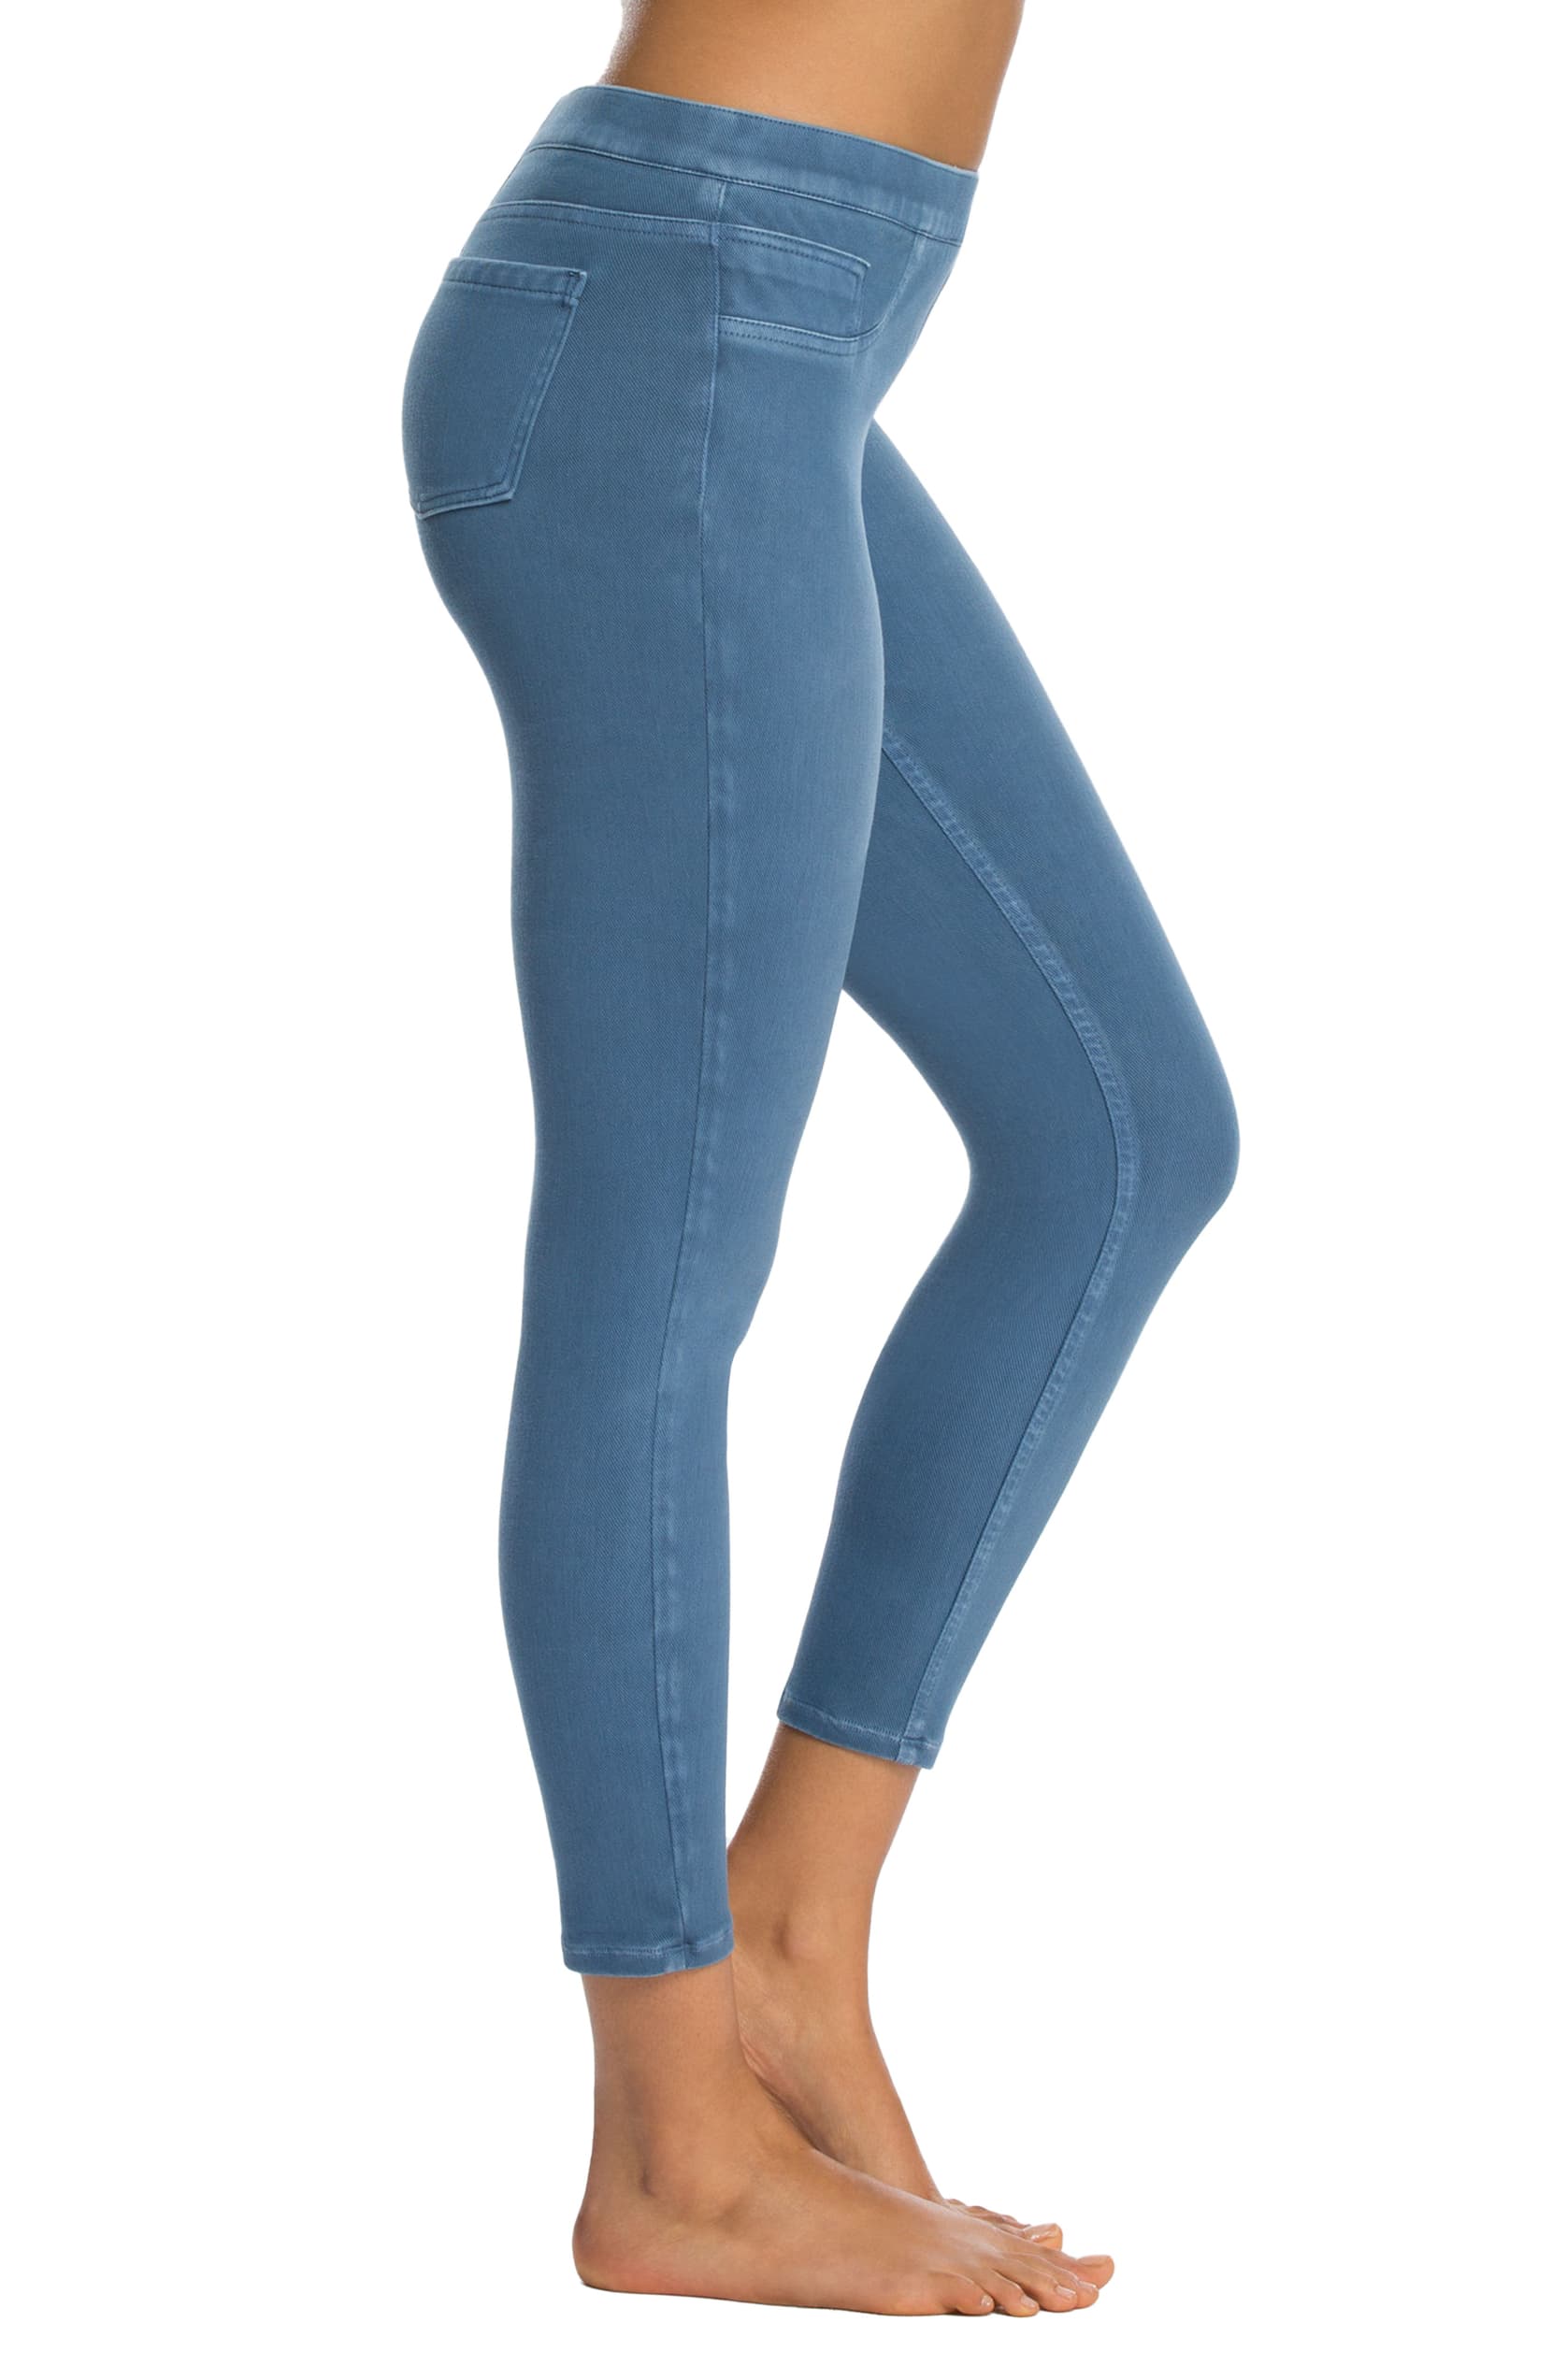 We’re Wearing These Ultra-Comfortable Spanx Jeans All Spring Long ...